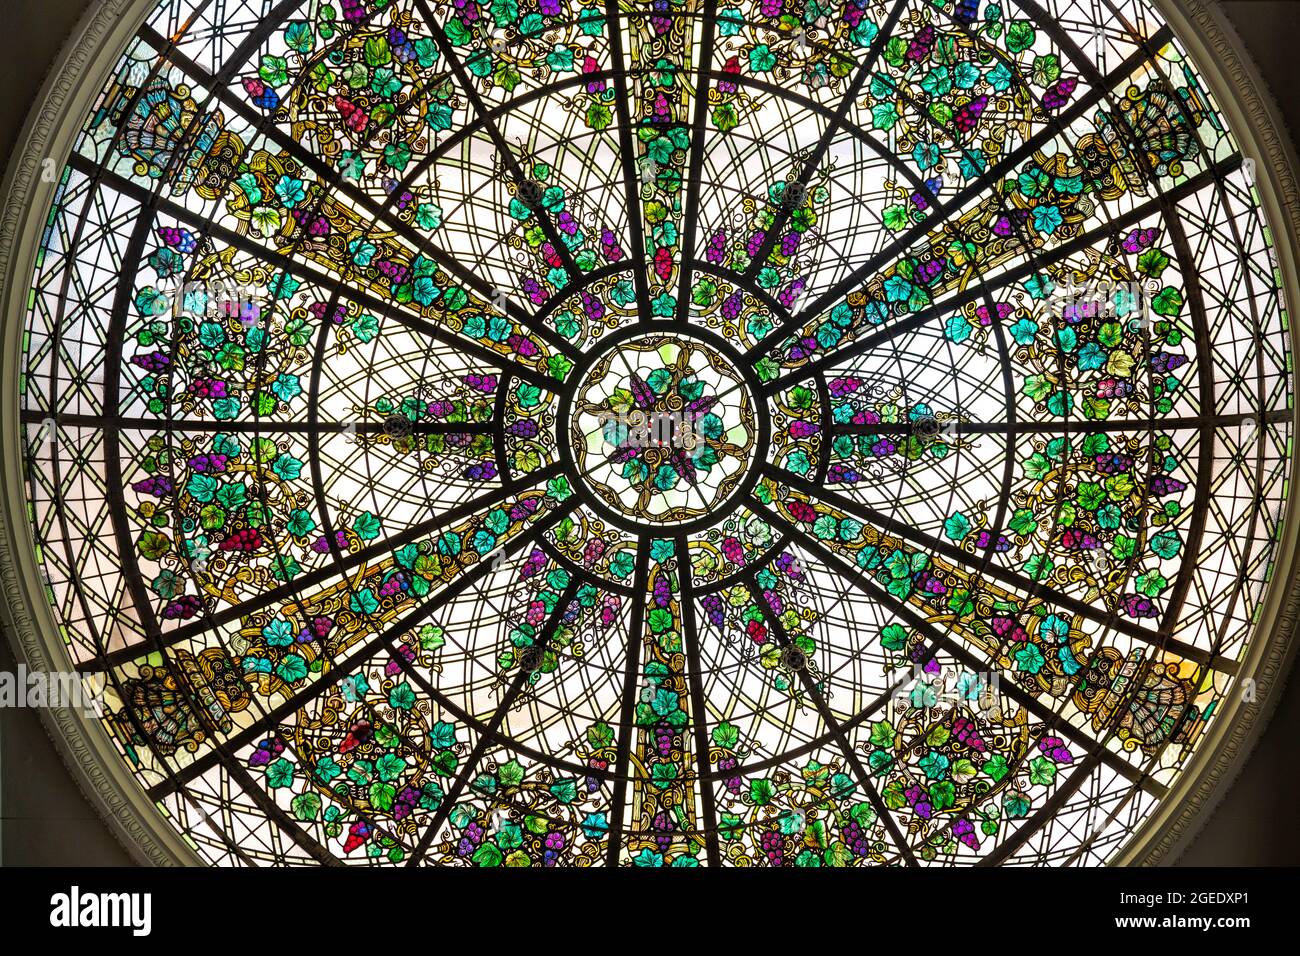 Stained glass cupola or dome in. Casa Loma. Casa Loma is a Gothic Revival architecture castle that is a major tourist attraction in the city of Toron Stock Photo